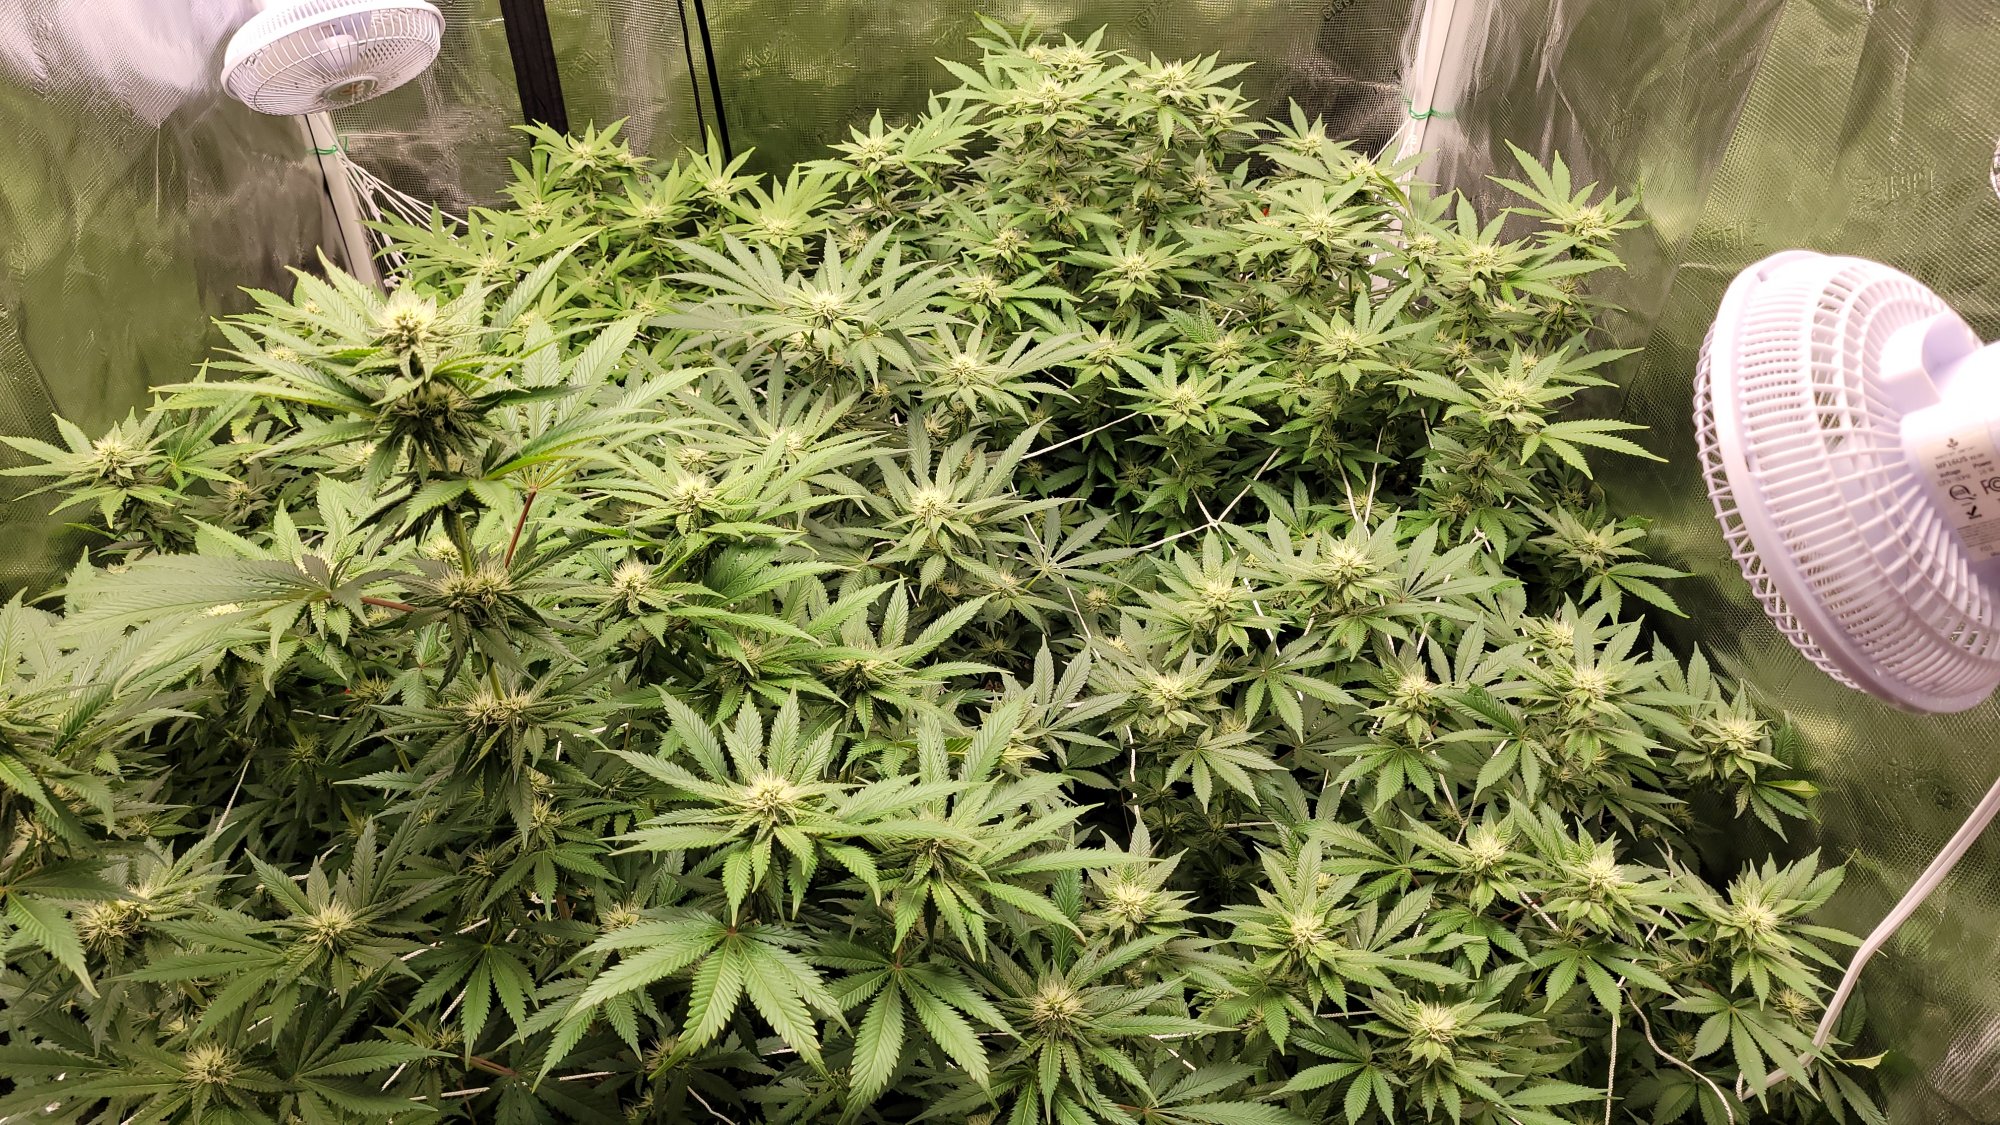 Help please not sure what healthynormal plants should look like